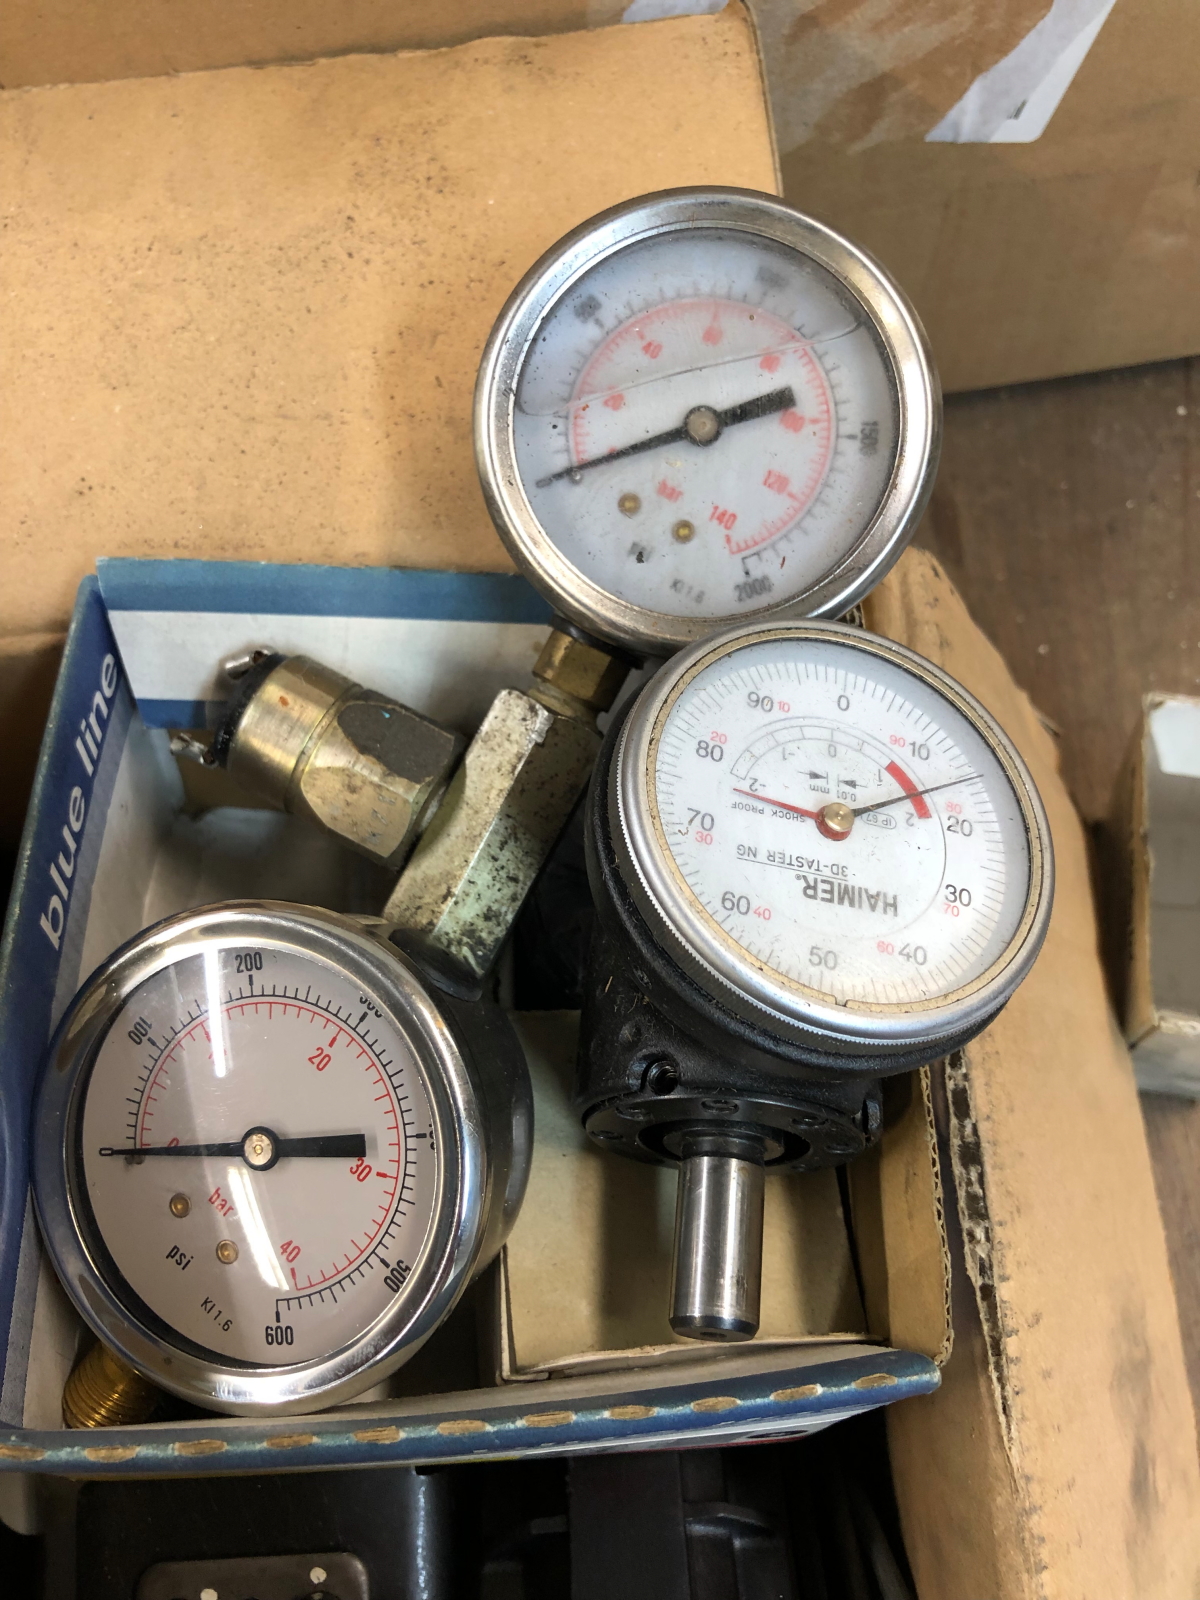 VARIOUS PRESSURE GAUGES, AND MISC. ITEMS INCLUDING SAW BLADES, A CNC SCREEN, ETC. - Image 2 of 10